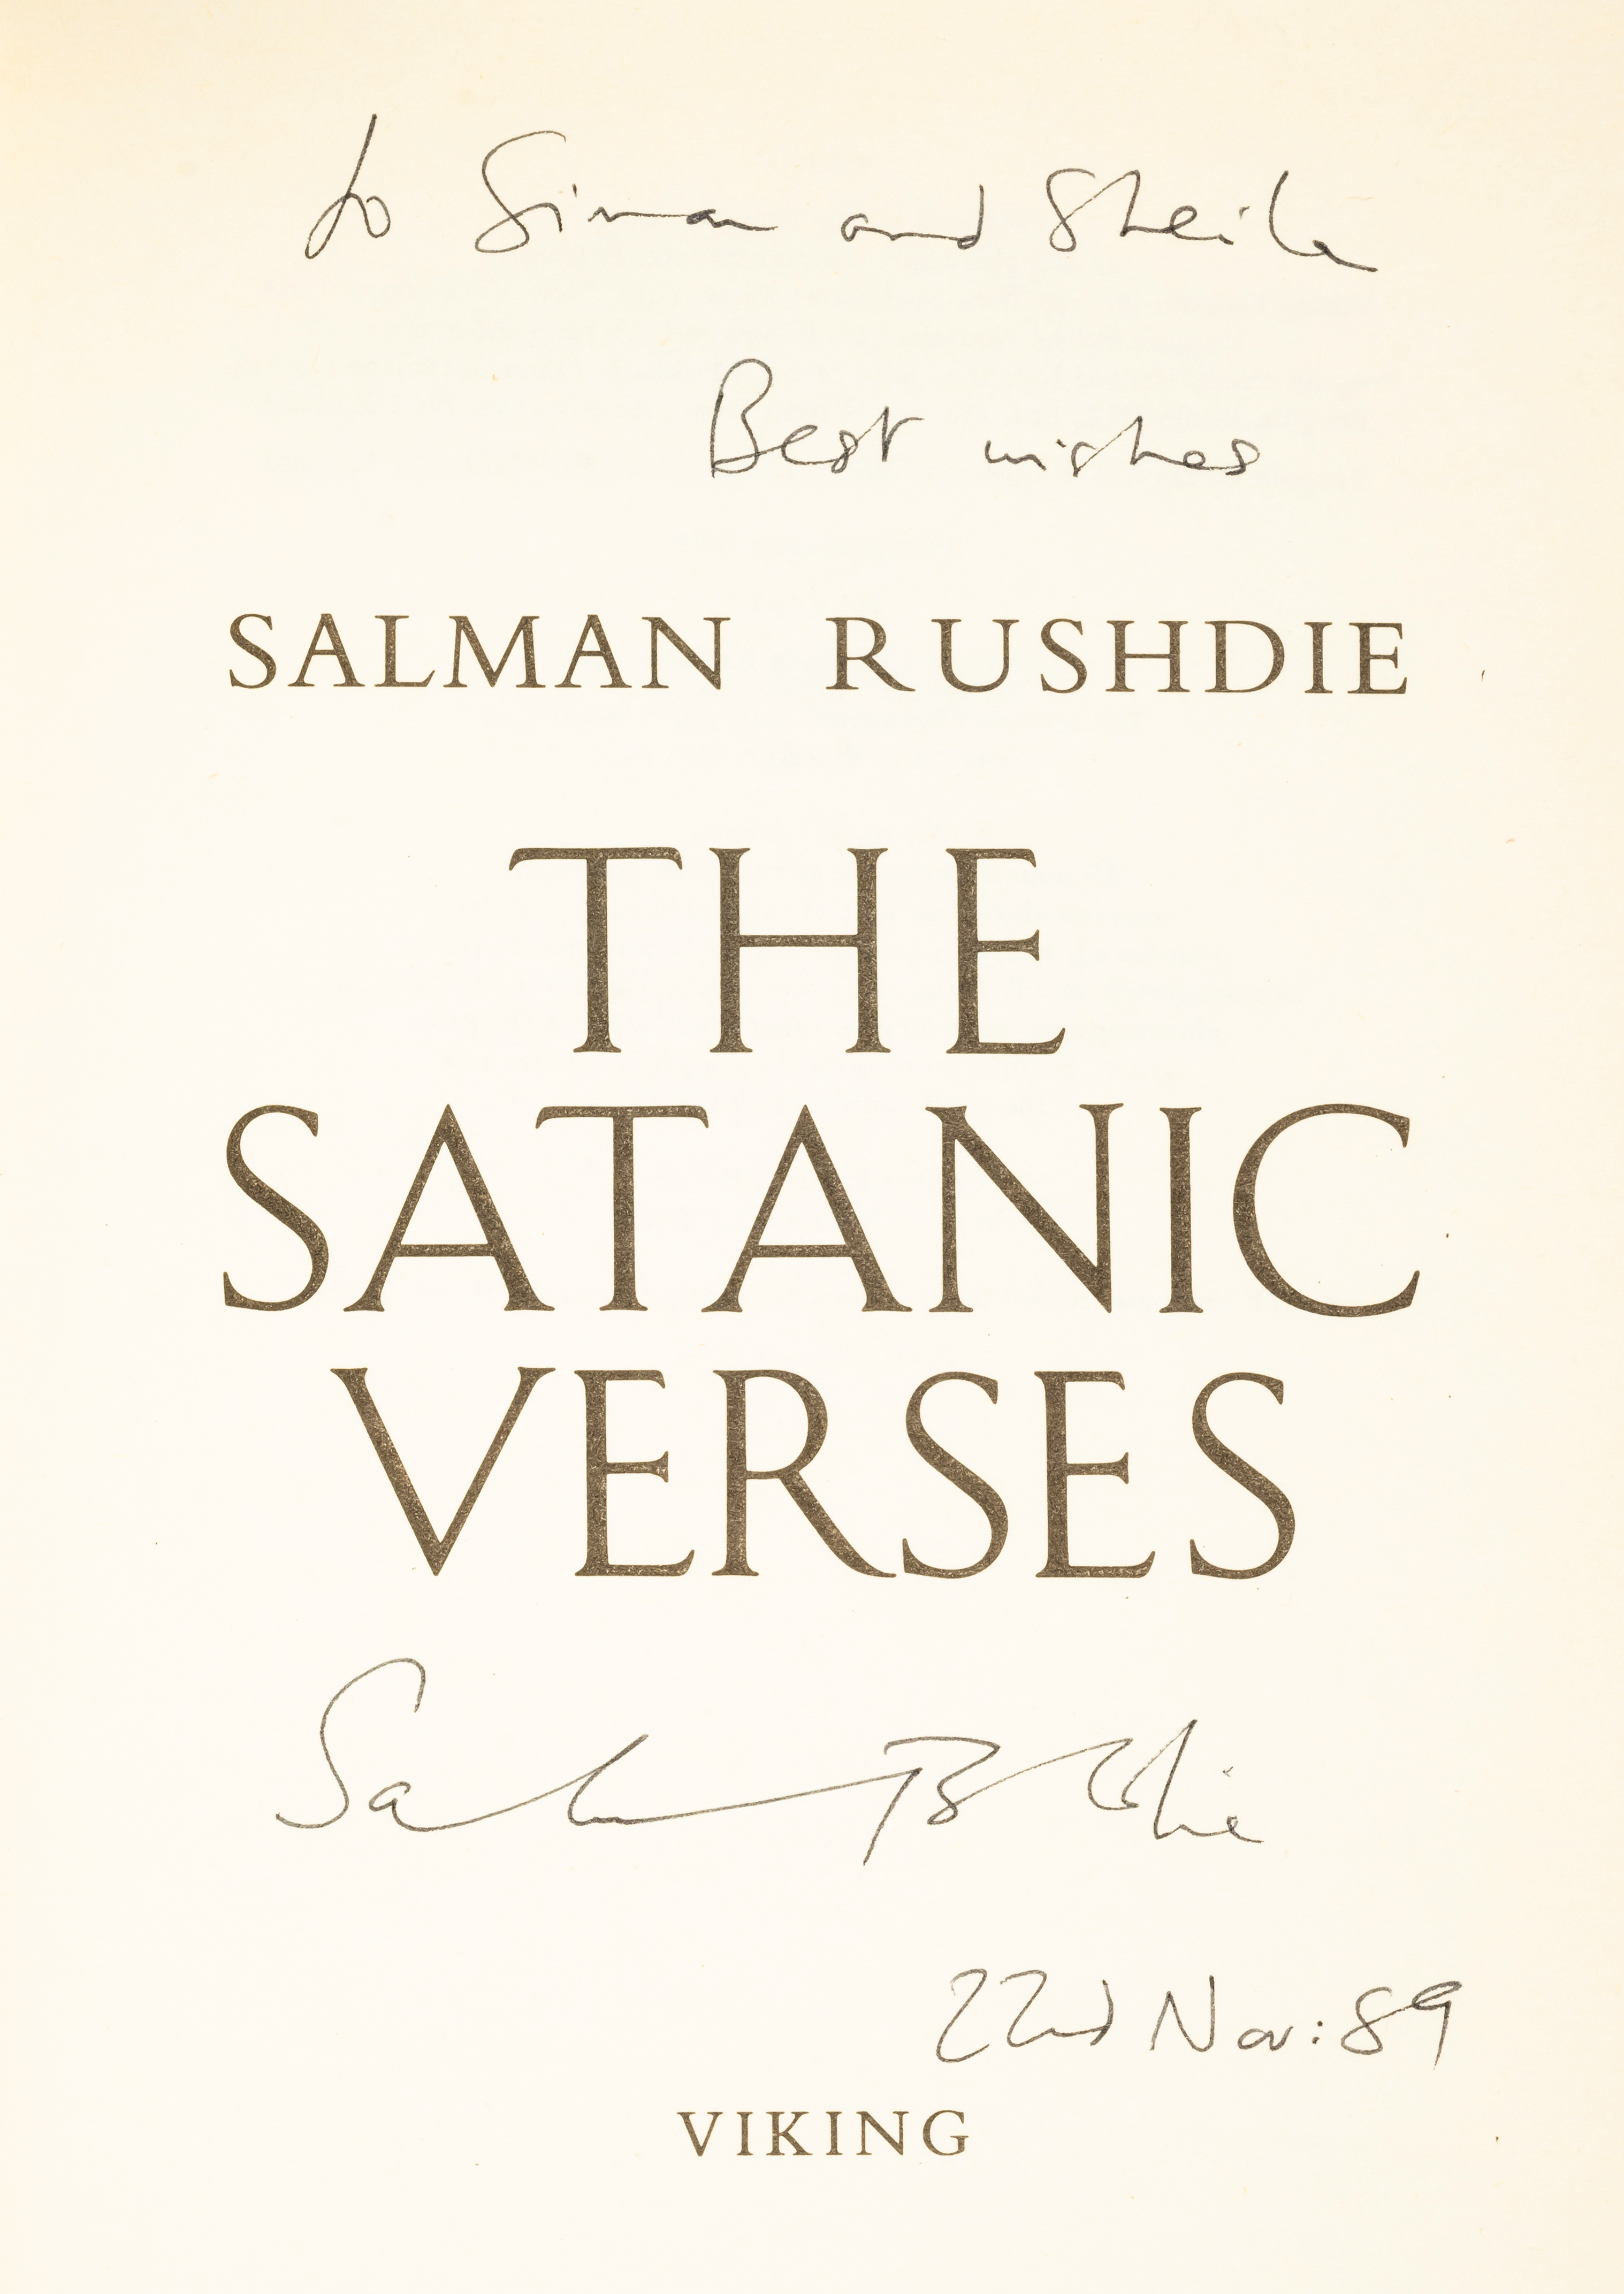 Rushdie (Salman) The Satanic Verses, signed presentation inscription from the author, intriguing ... - Image 2 of 2